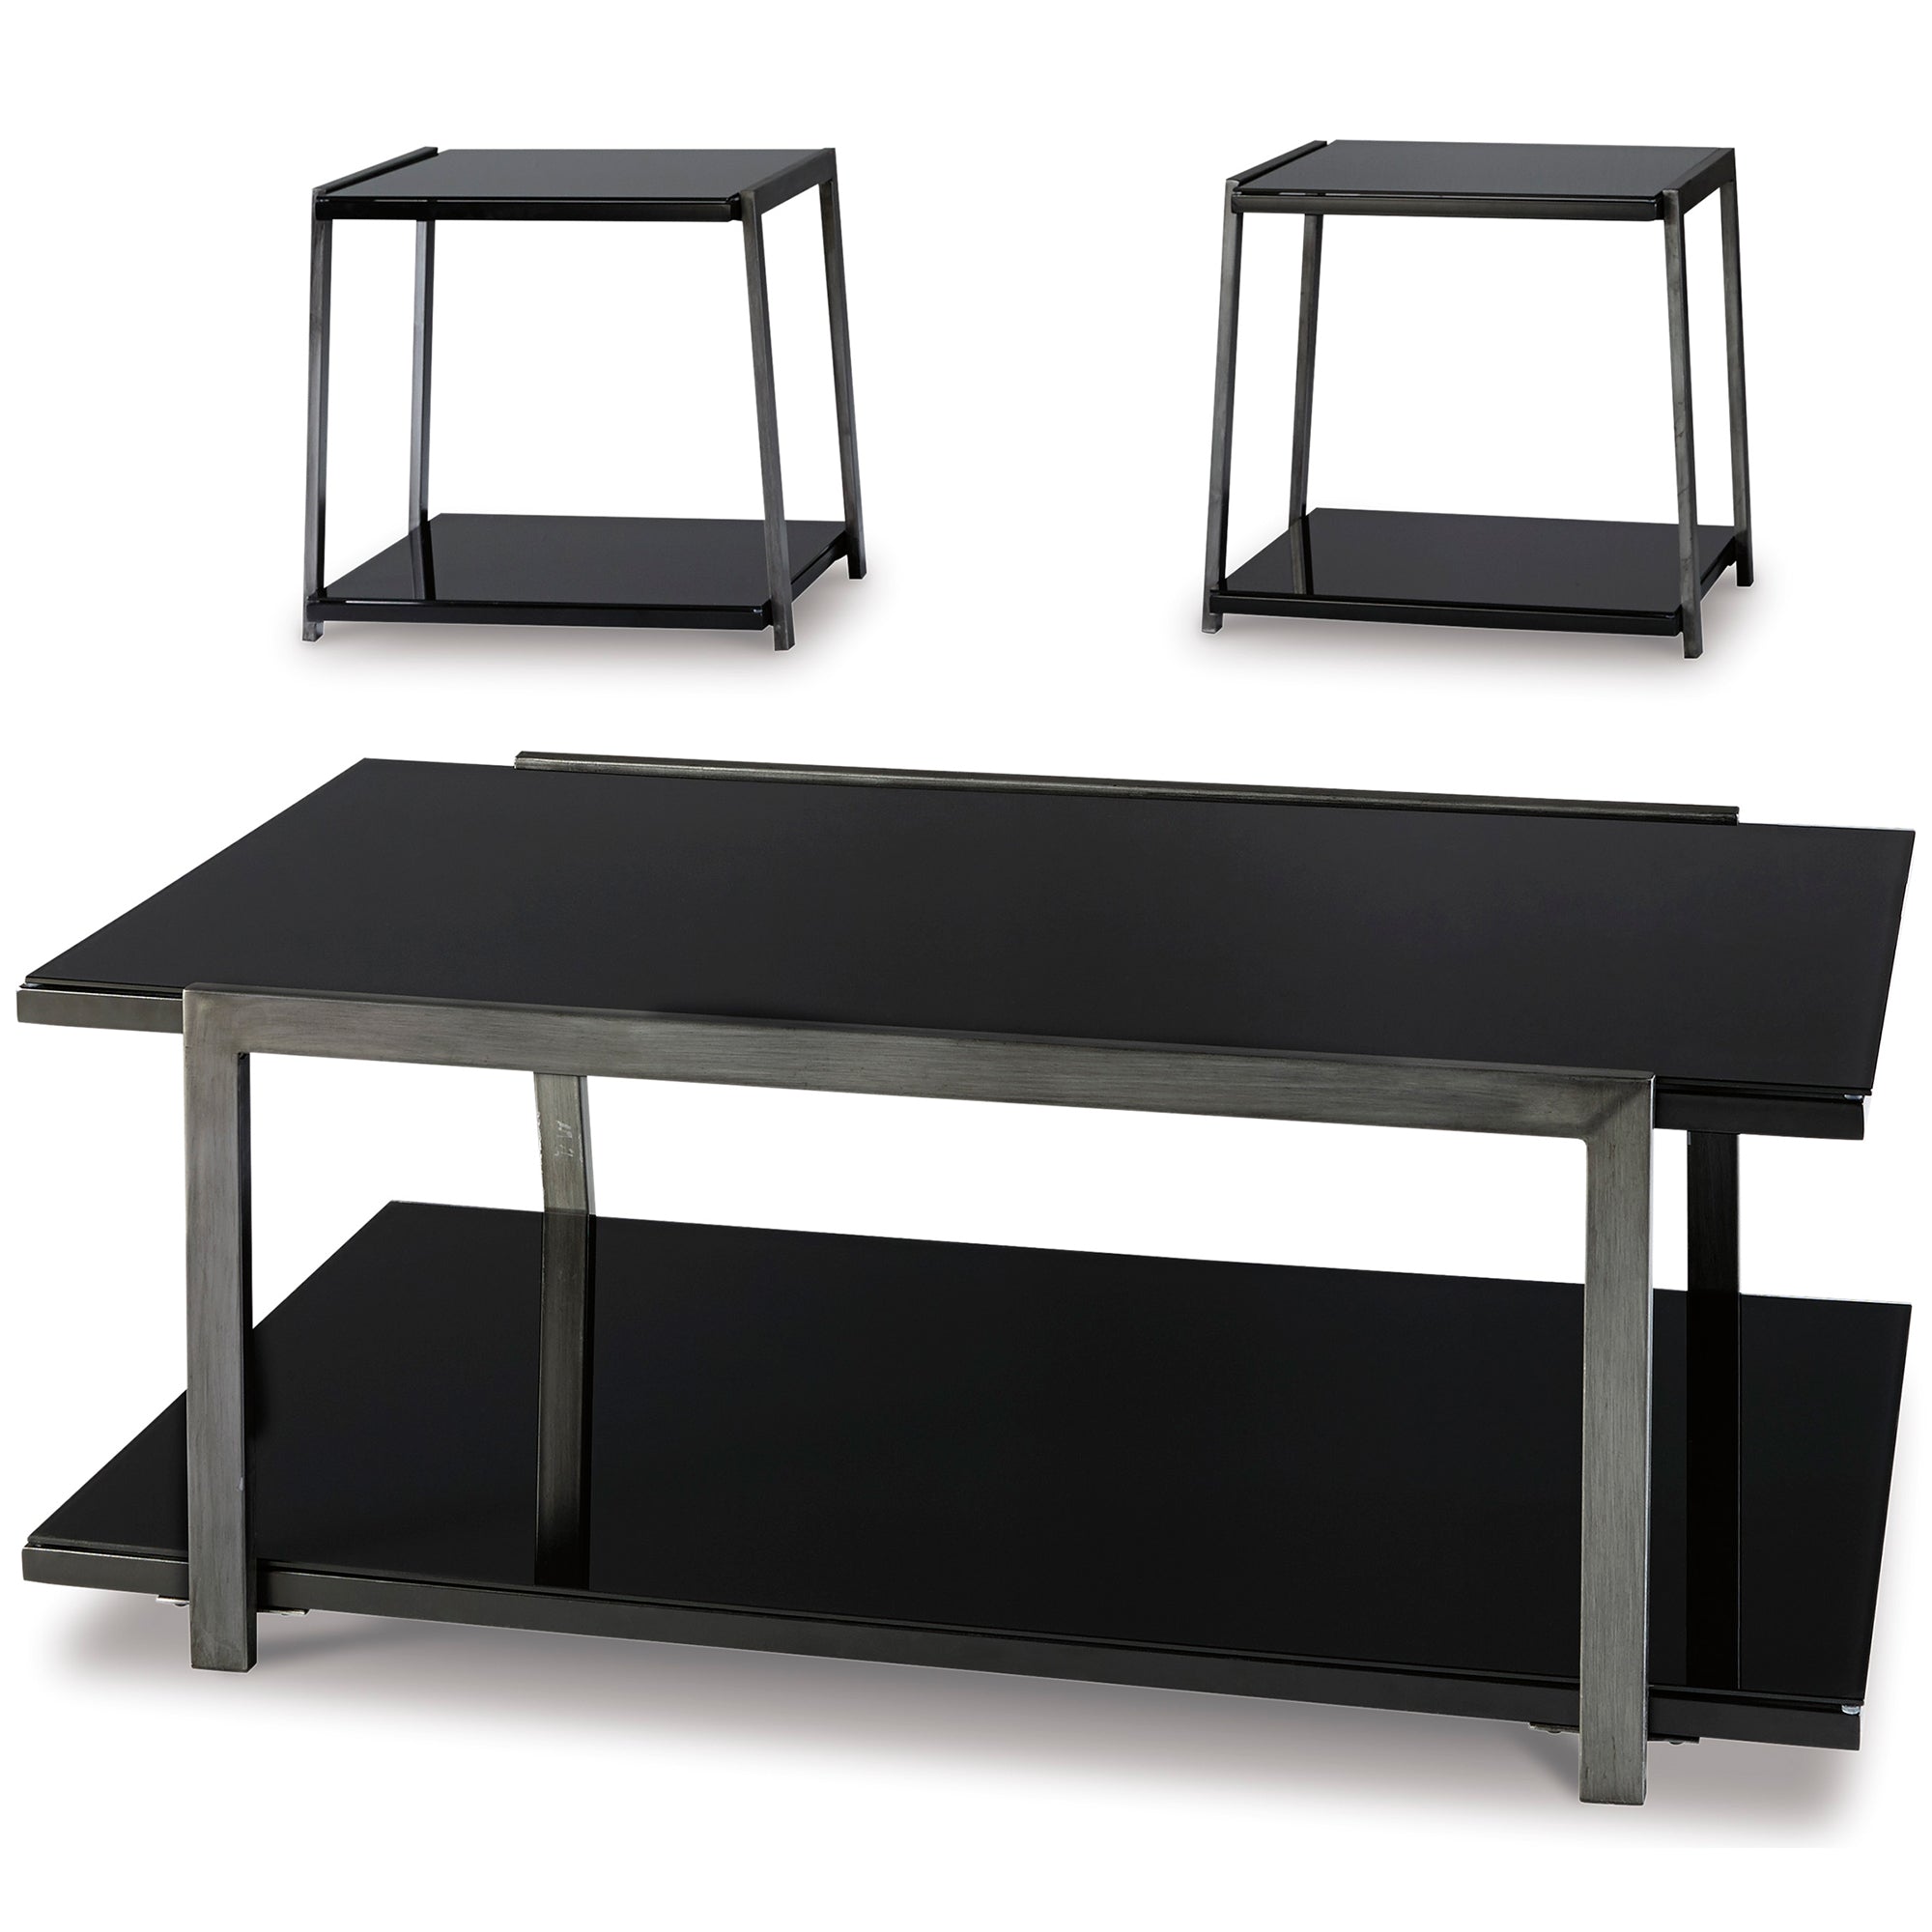 Rollynx Table (Set of 3)